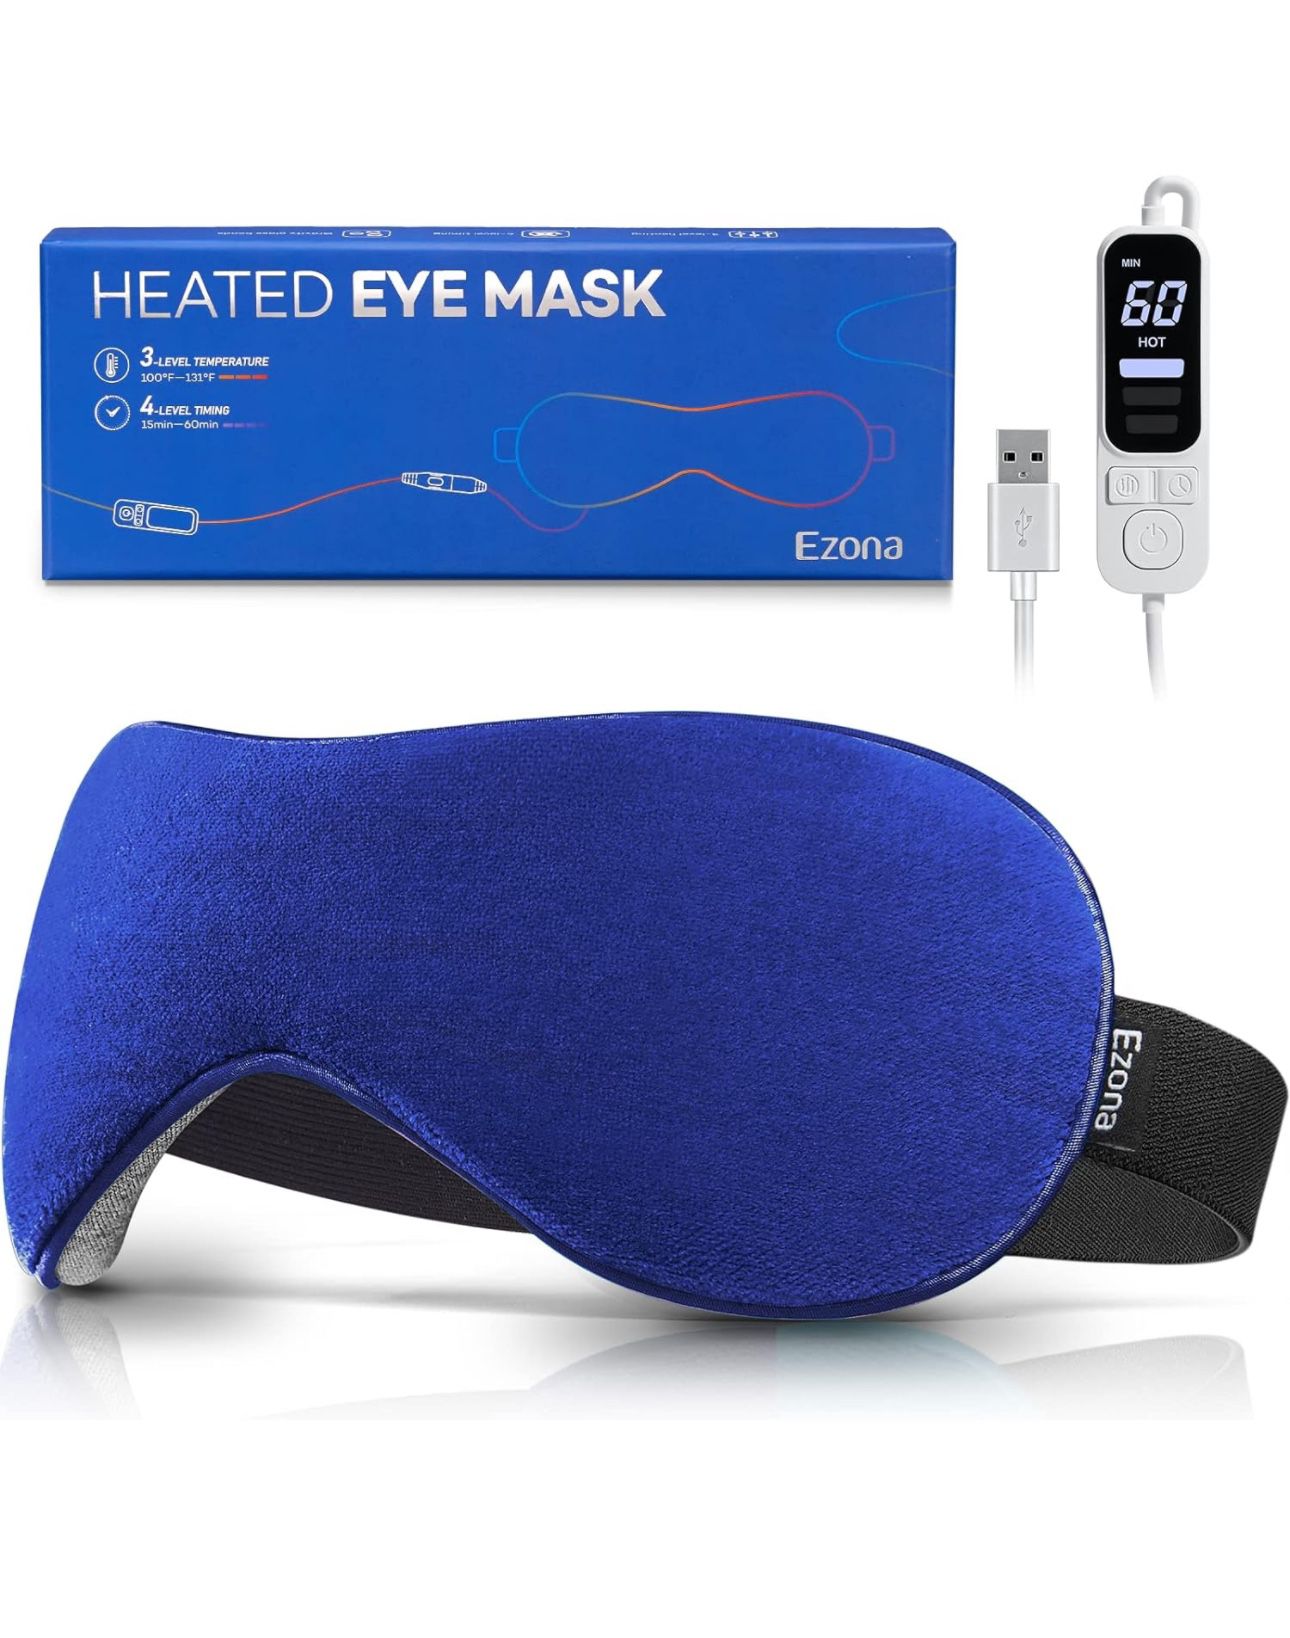 Heated Eye Mask with Temperature & Timer Control - USB Eye Heating Pad